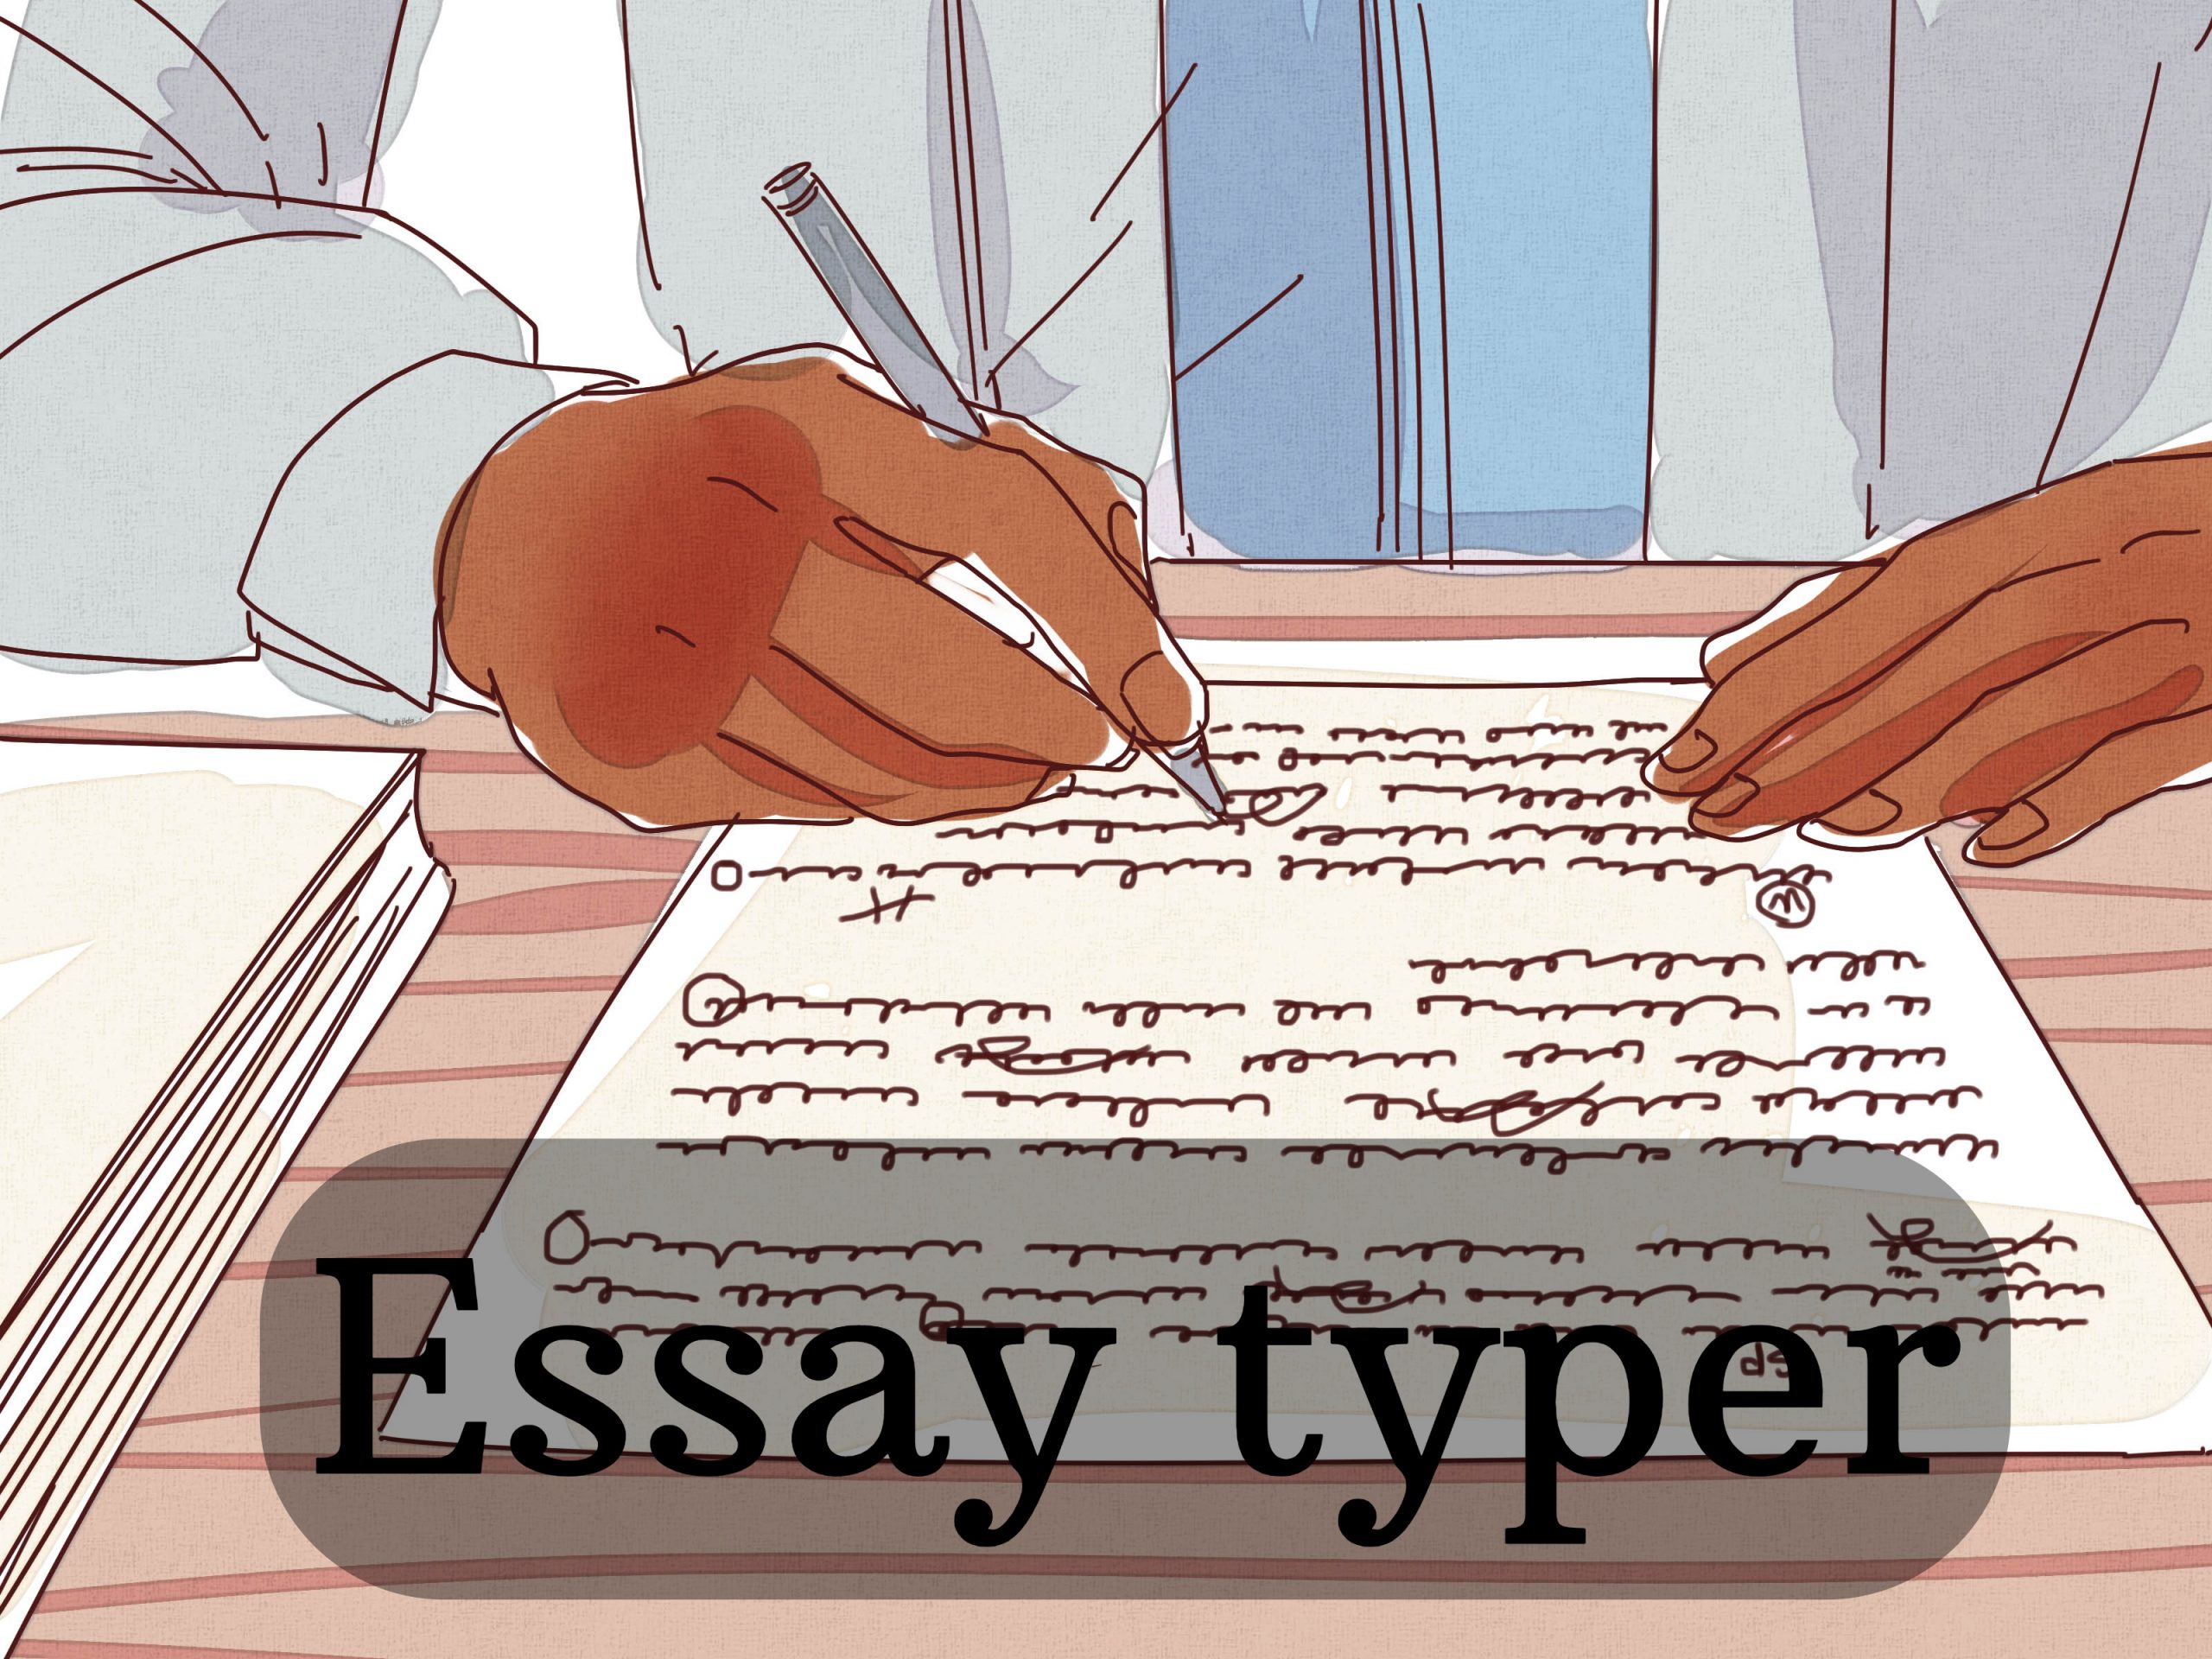 pages like essay typer